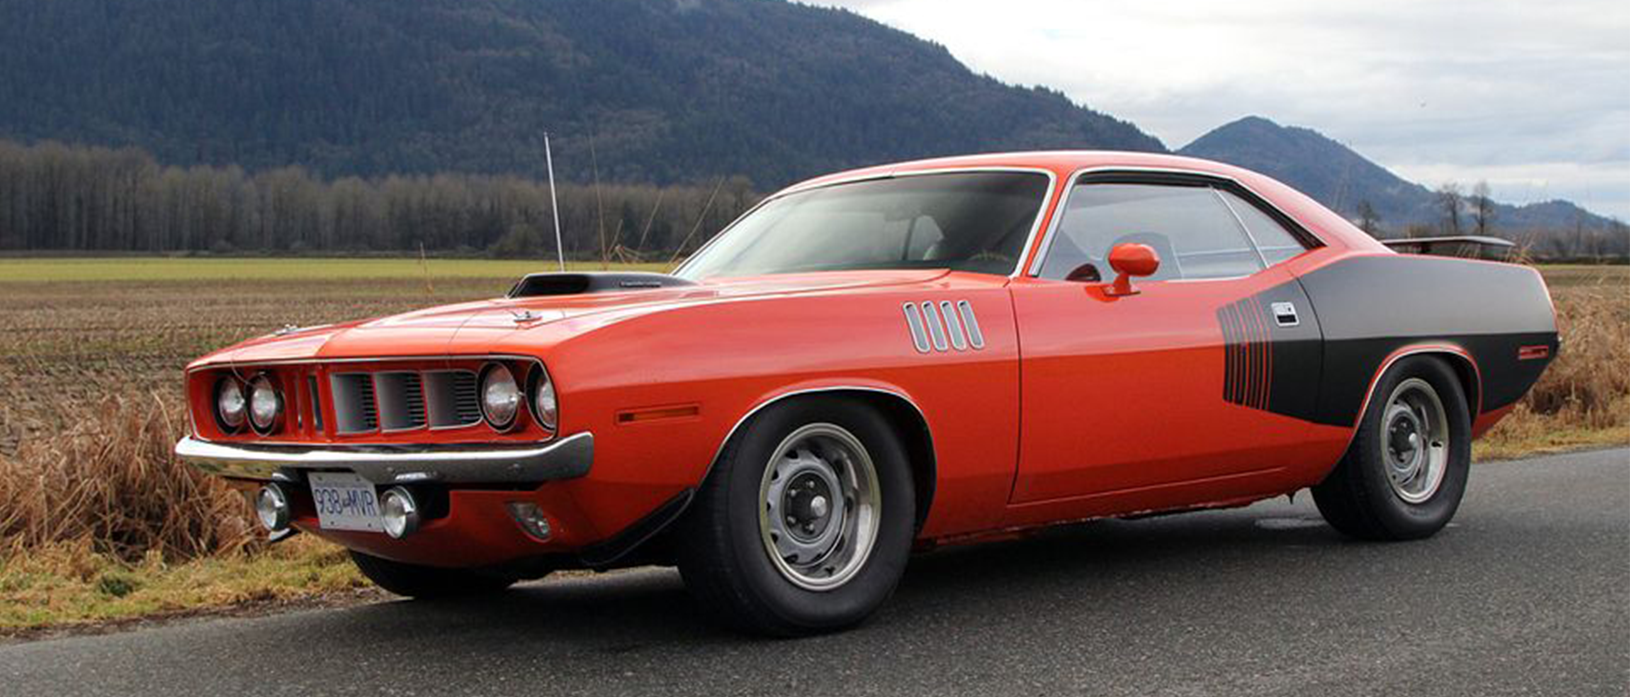 Plymouth Barracuda: Let’s Re-Work this Muscle